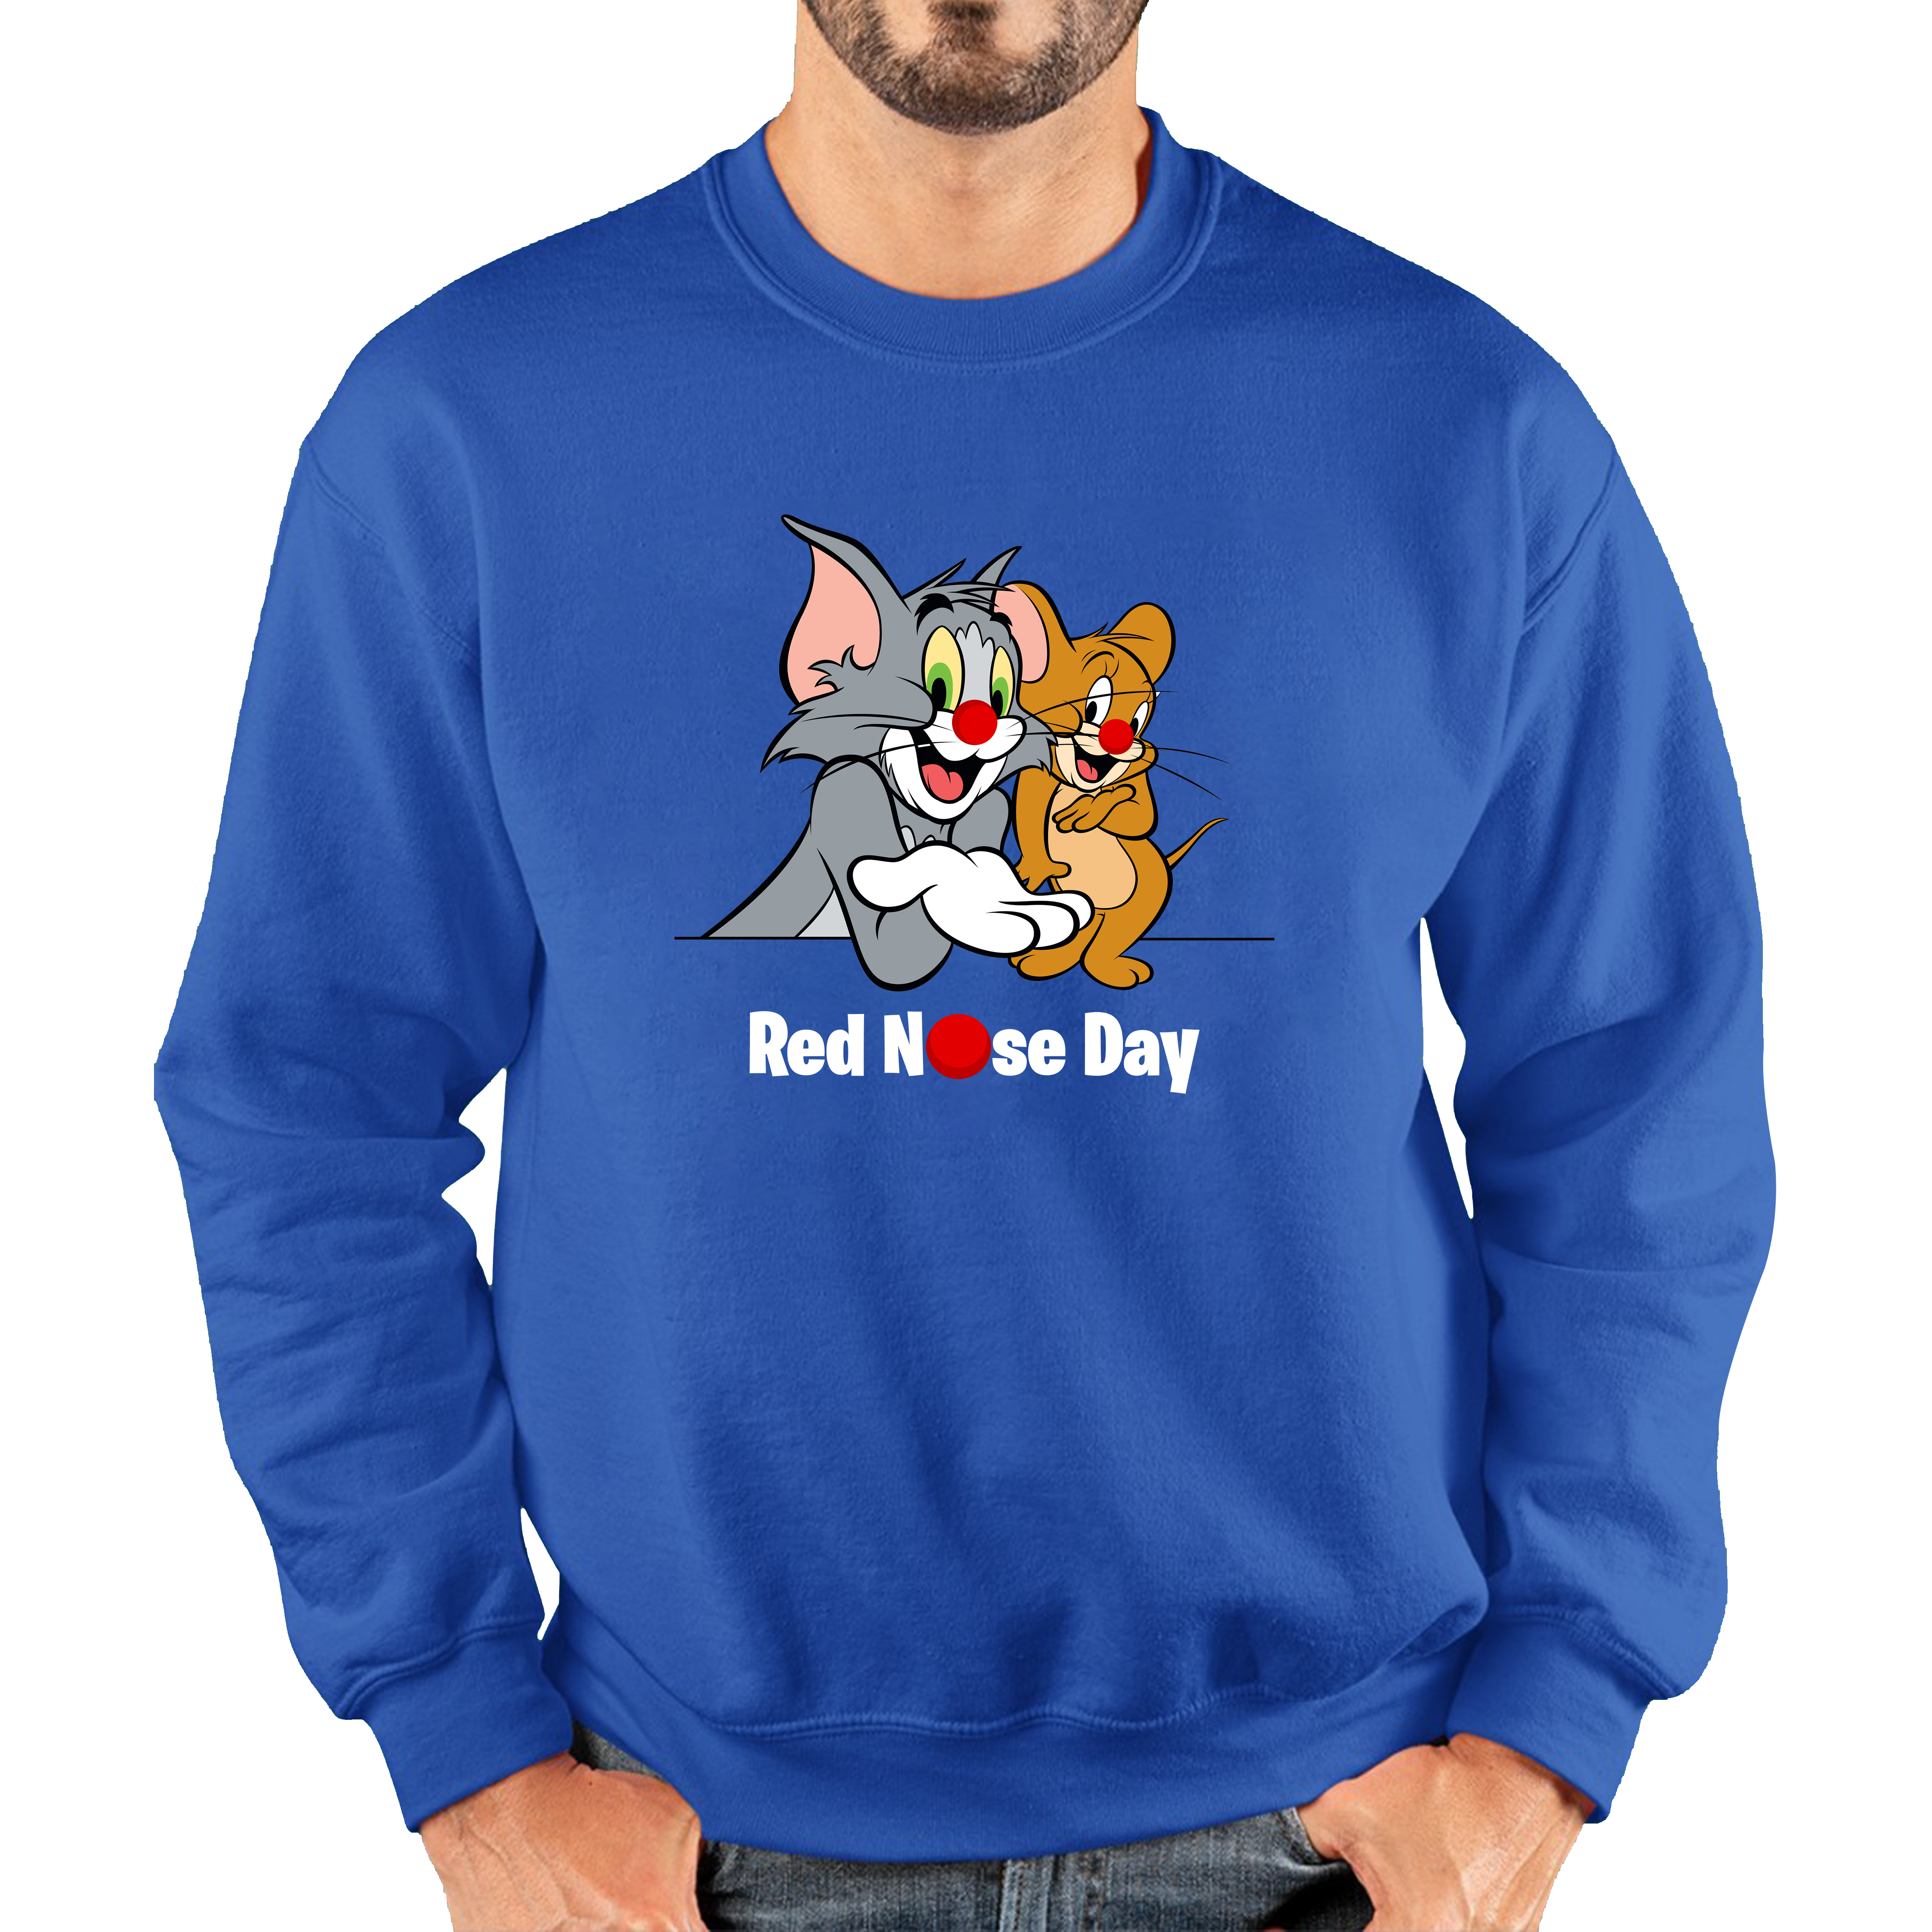 Tom And Jerry Red Nose Day Adult Sweatshirt. 50% Goes To Charity